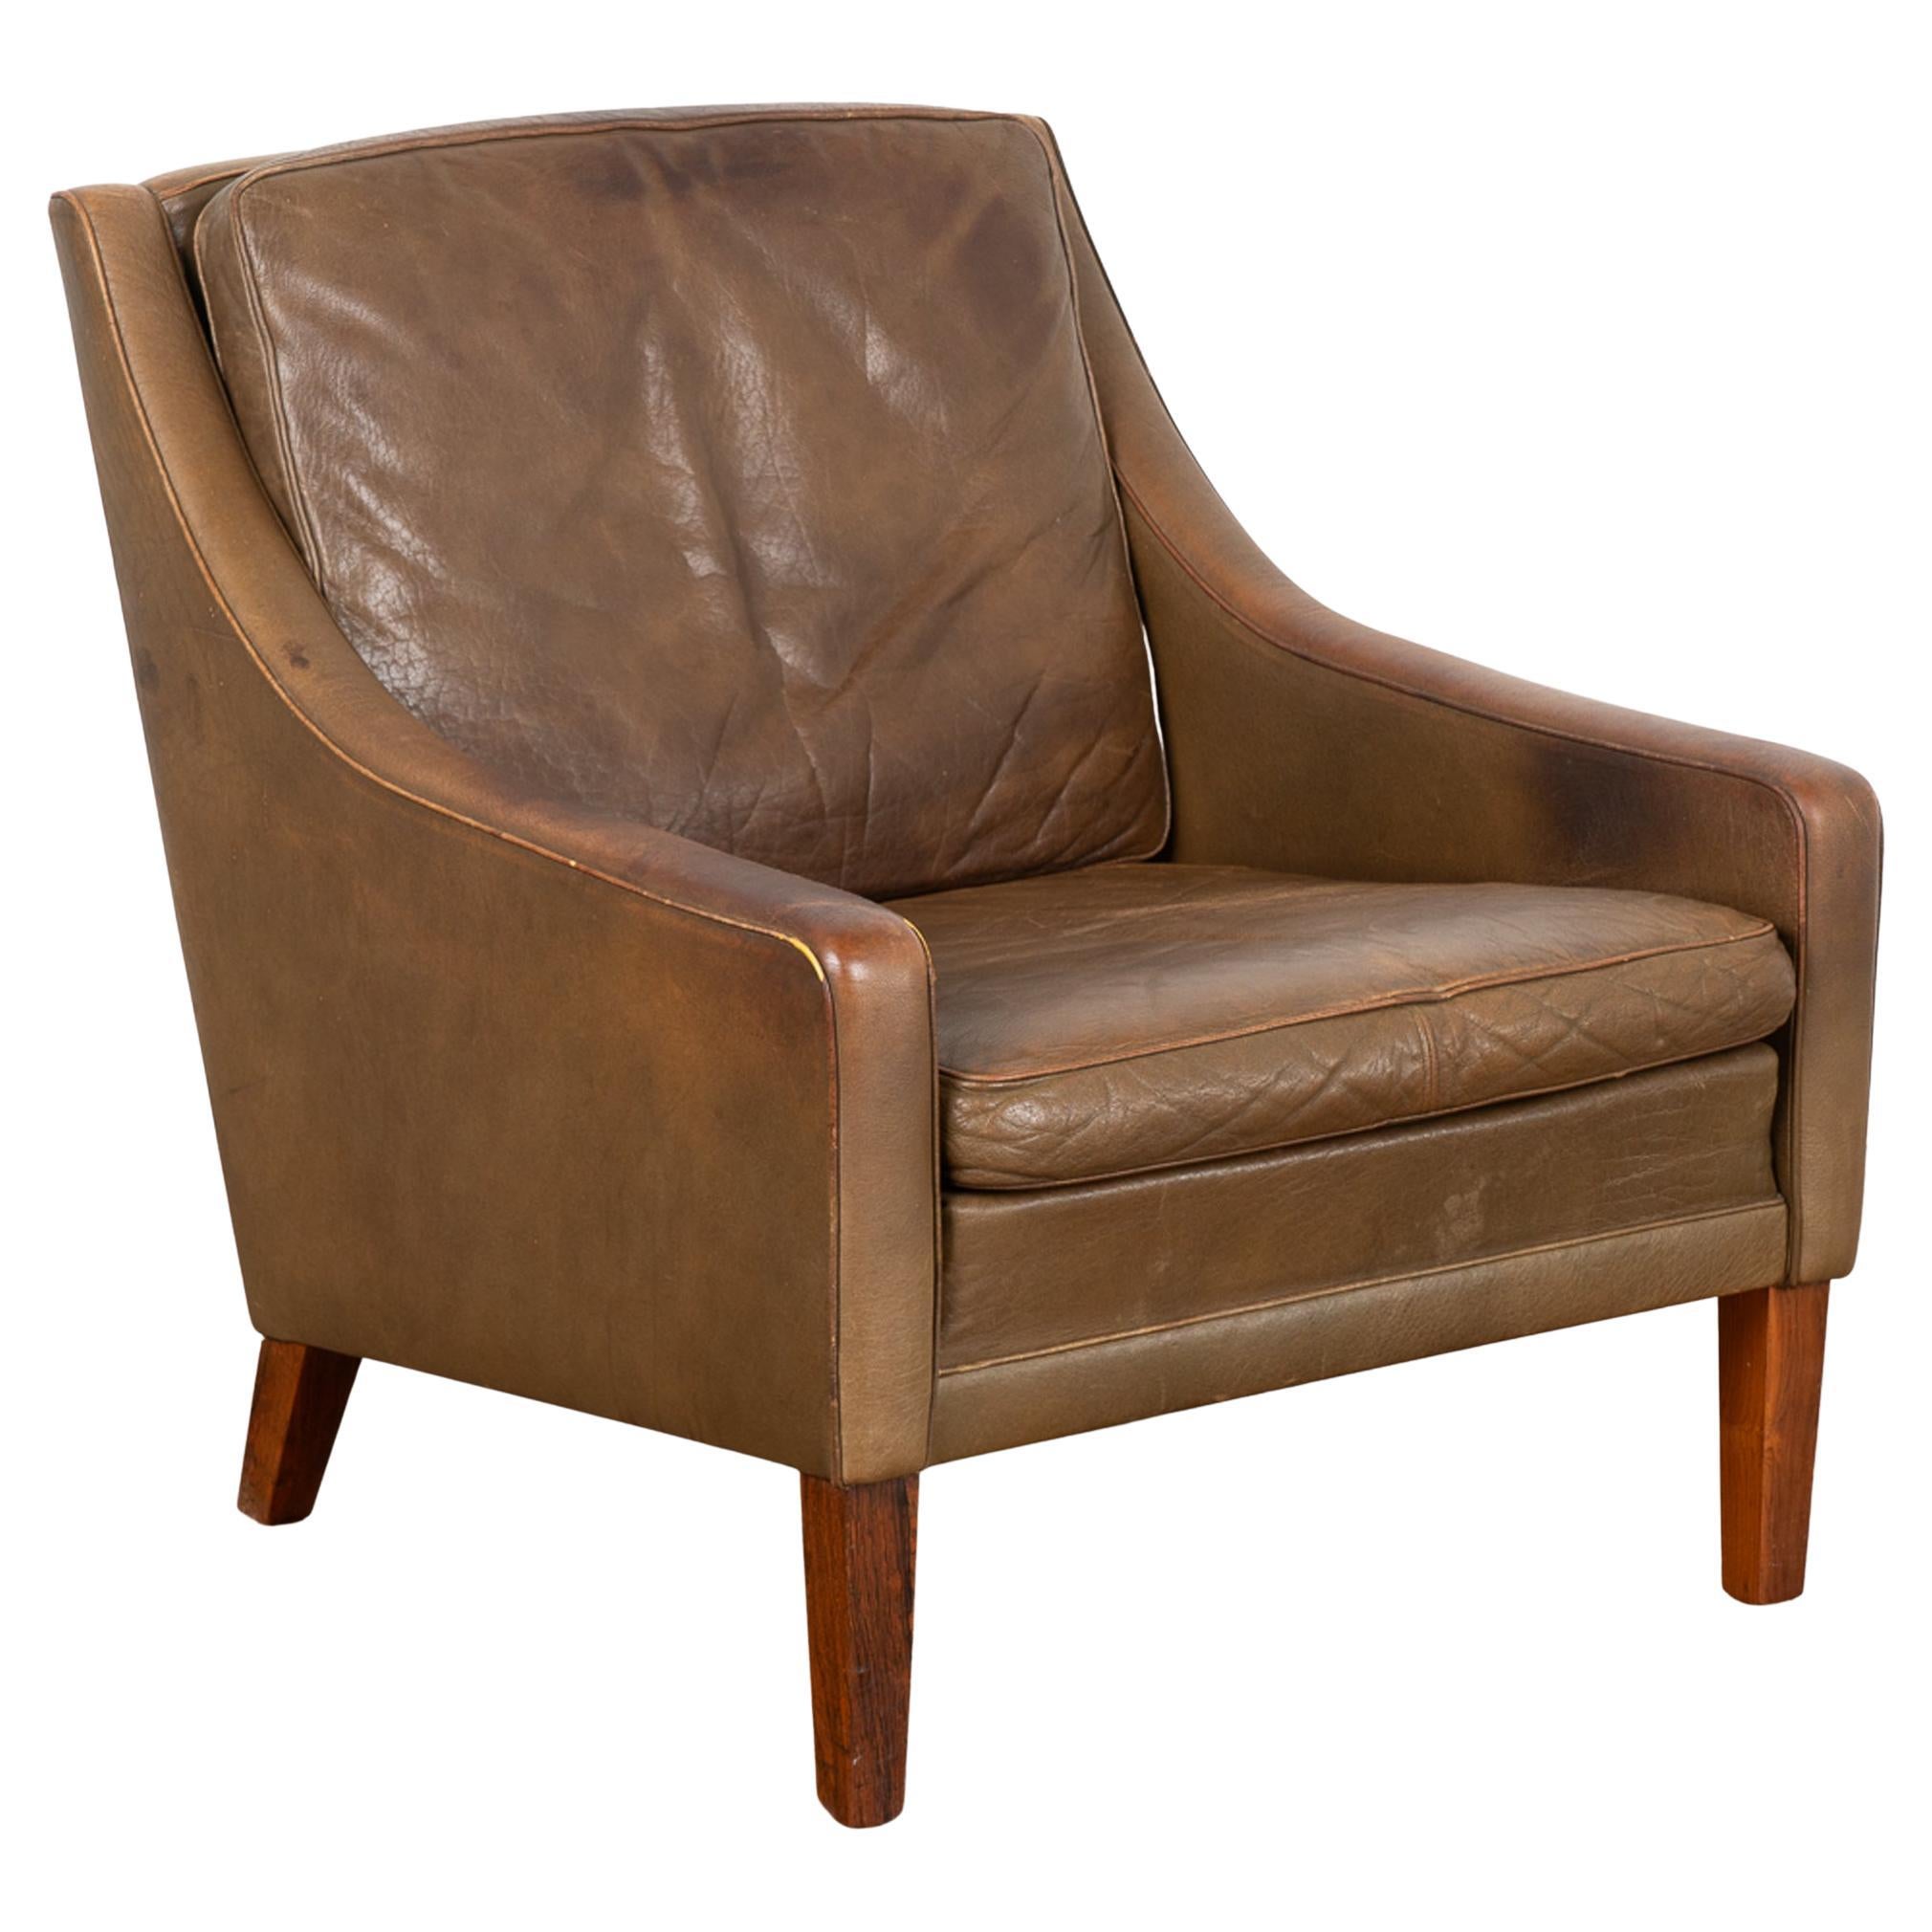 Mid Century Brown Vintage Leather Arm Chair, Denmark circa 1960-70 For Sale